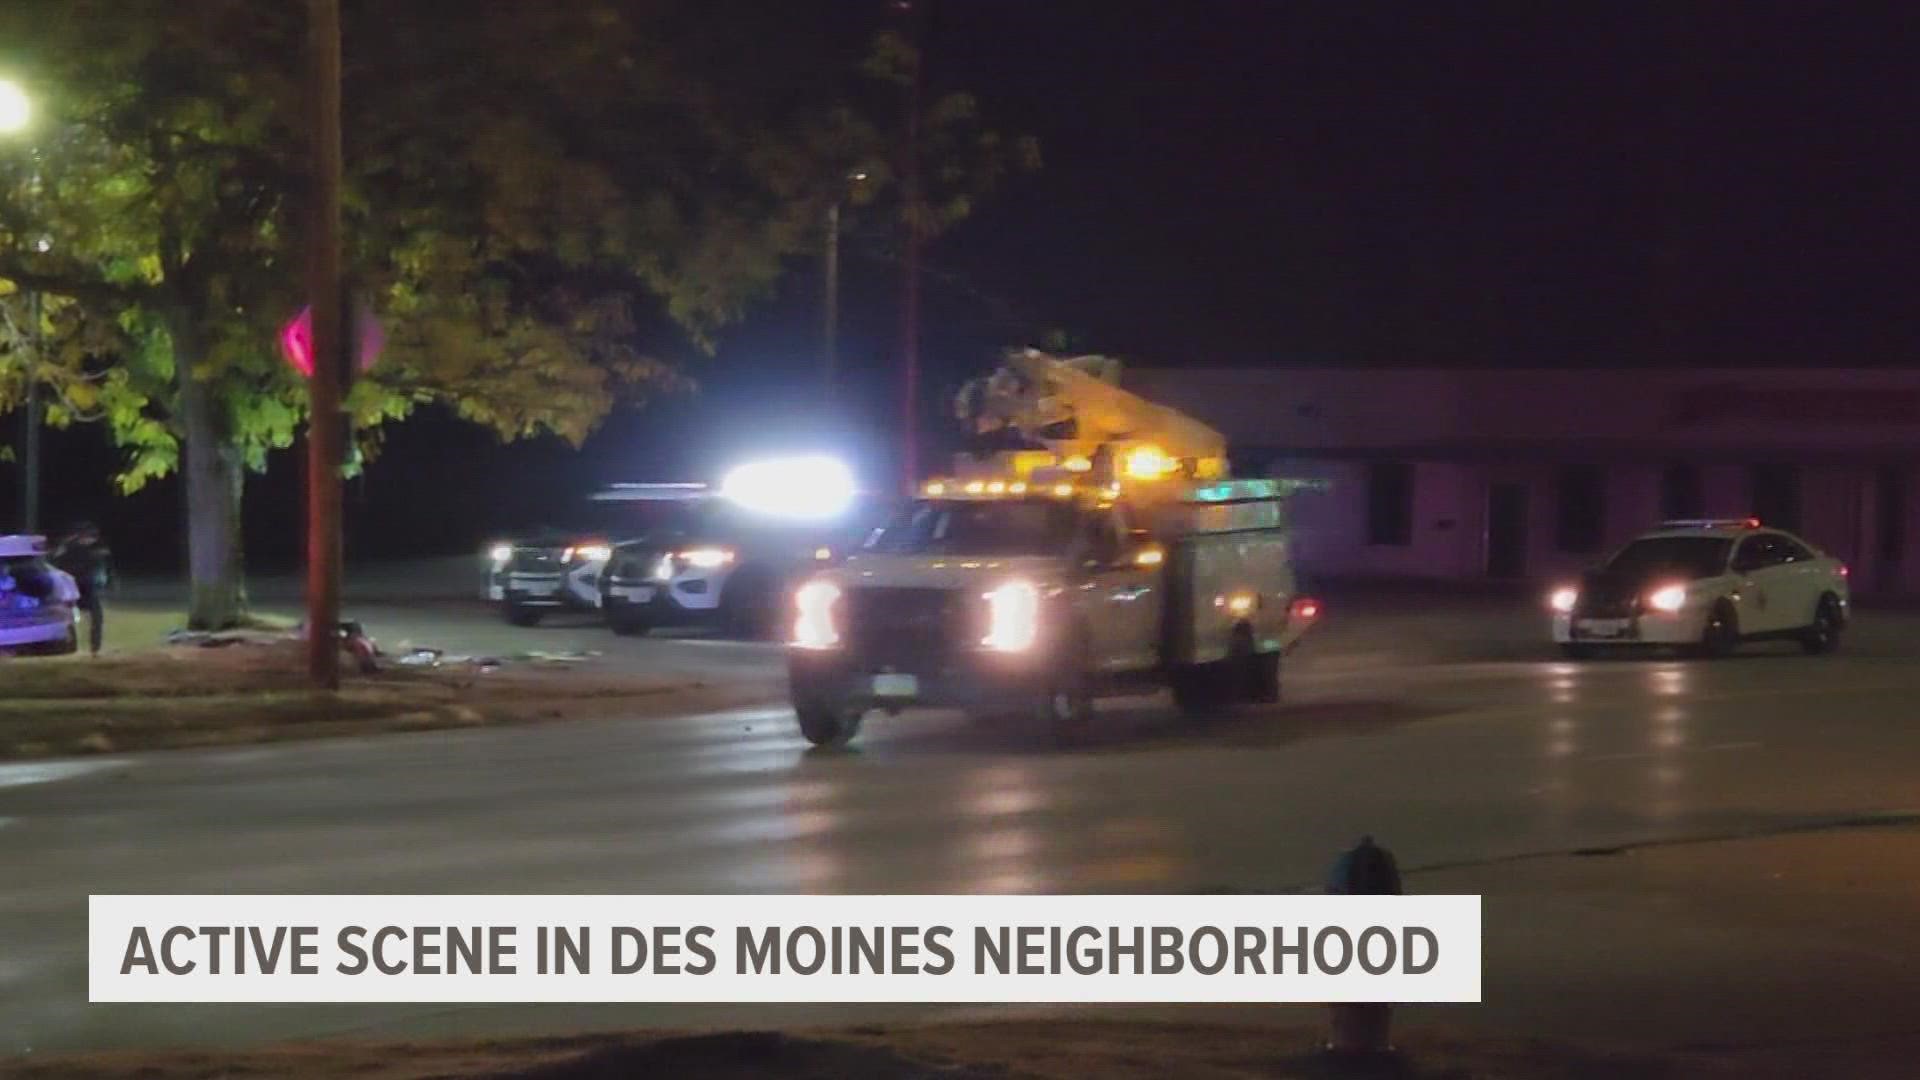 A suspect is in custody, and another person is in the hospital, following an overnight chase that ended in a crash in Des Moines overnight Tuesday.